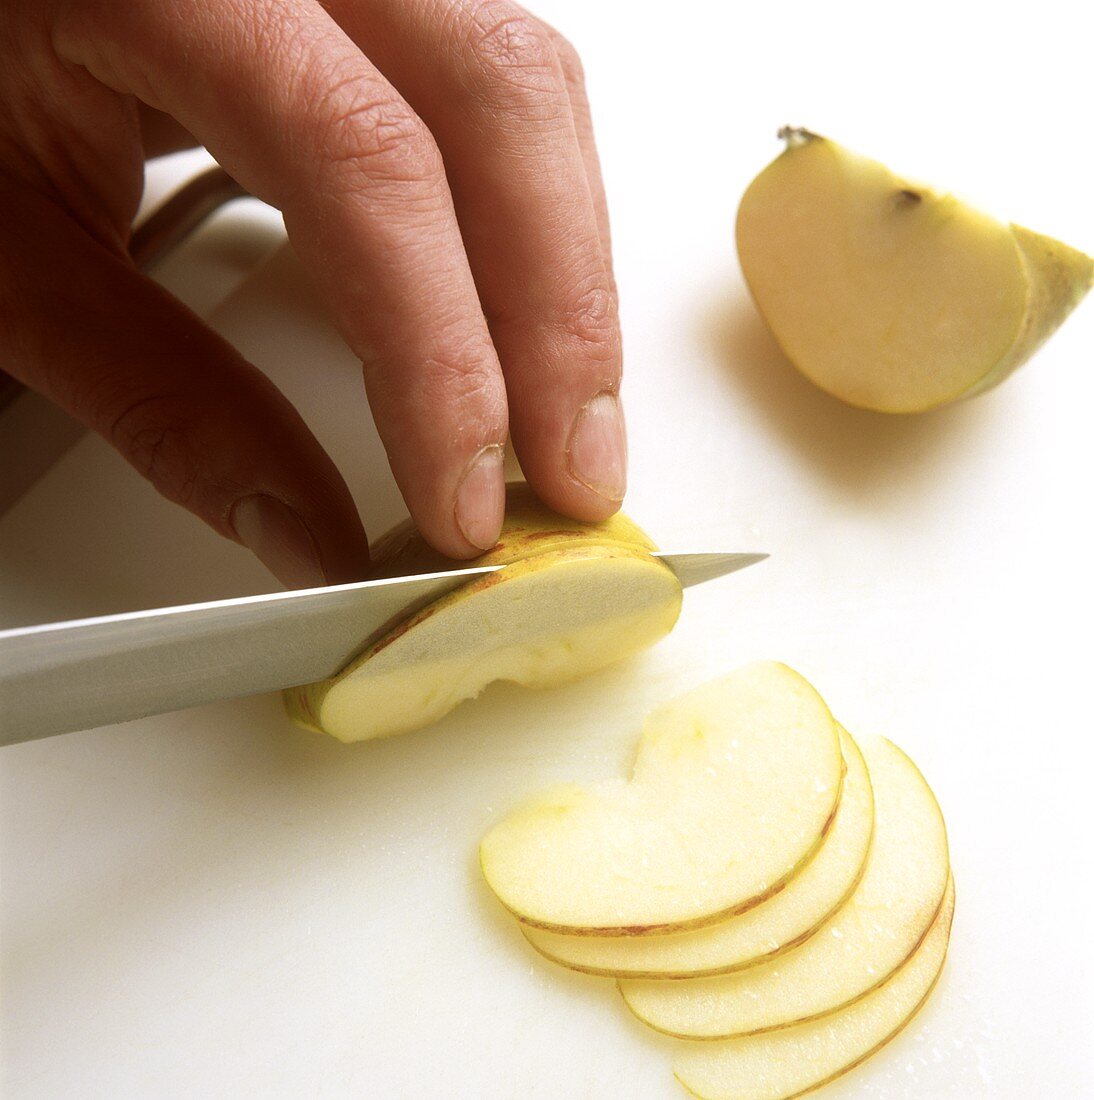 Finely slicing an apple